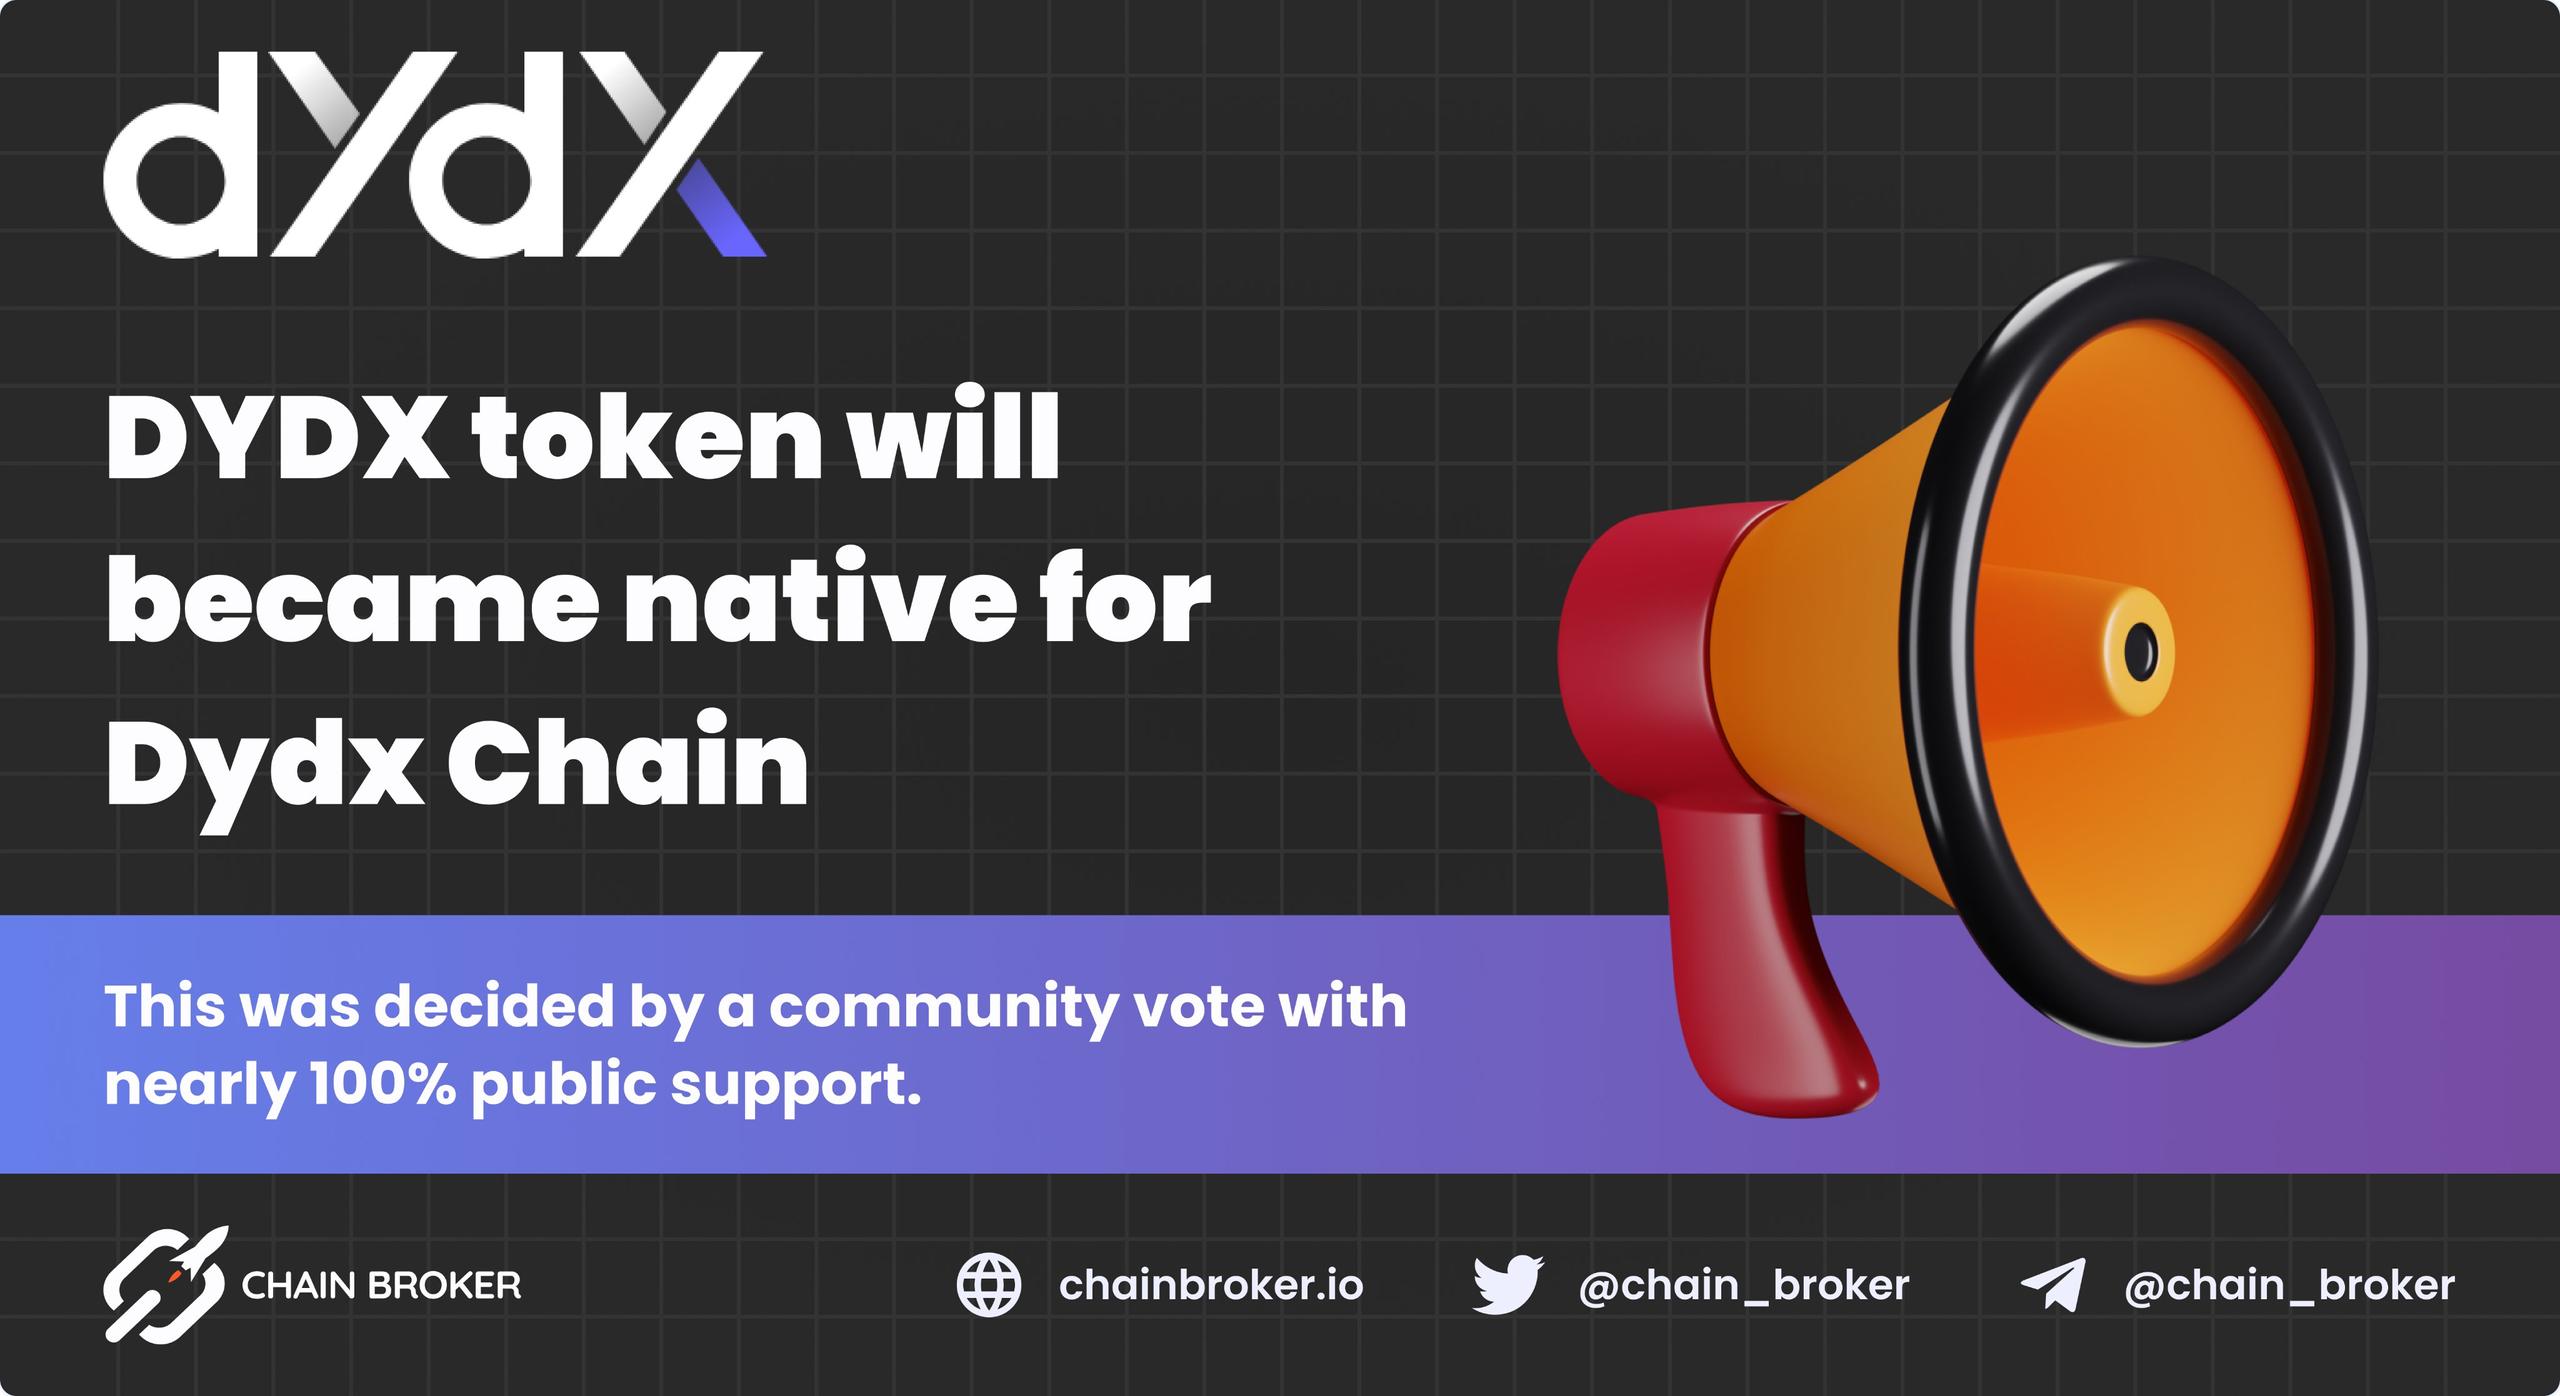 DYDX will become a native token on upcoming dydx blockchain